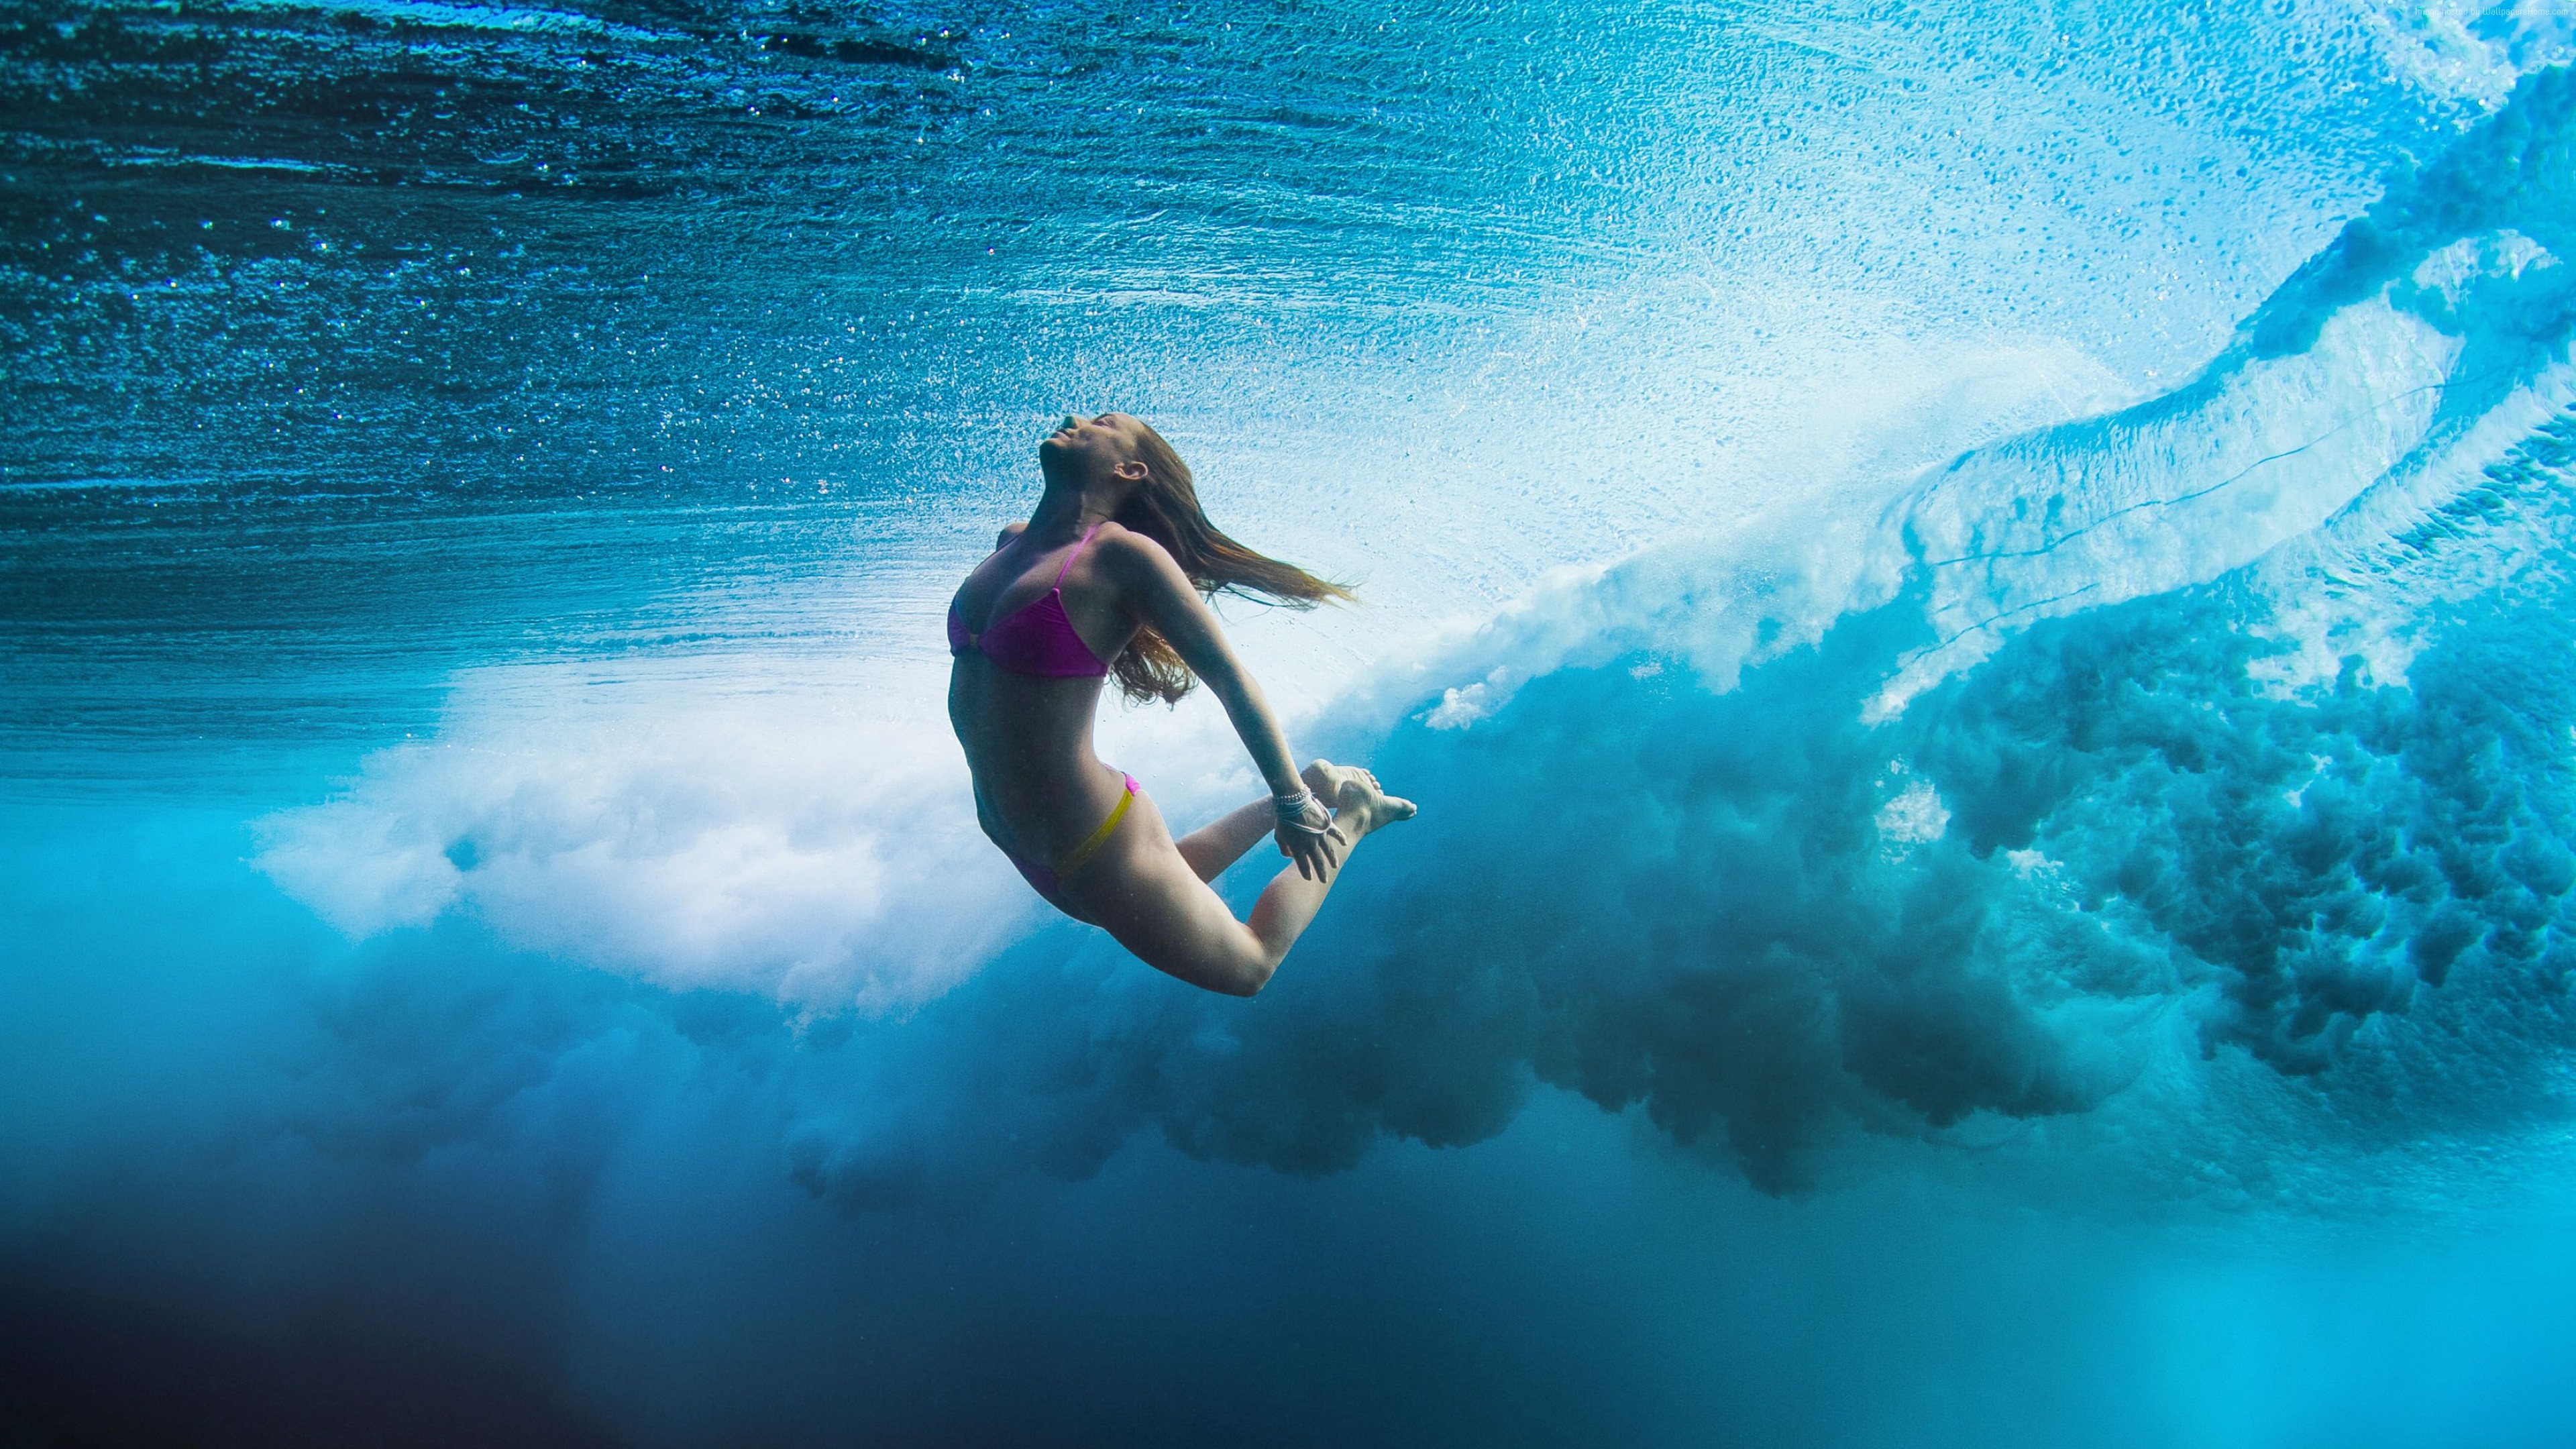 Surfing Girl Dive Sea Underwater Wallpaper And Stock